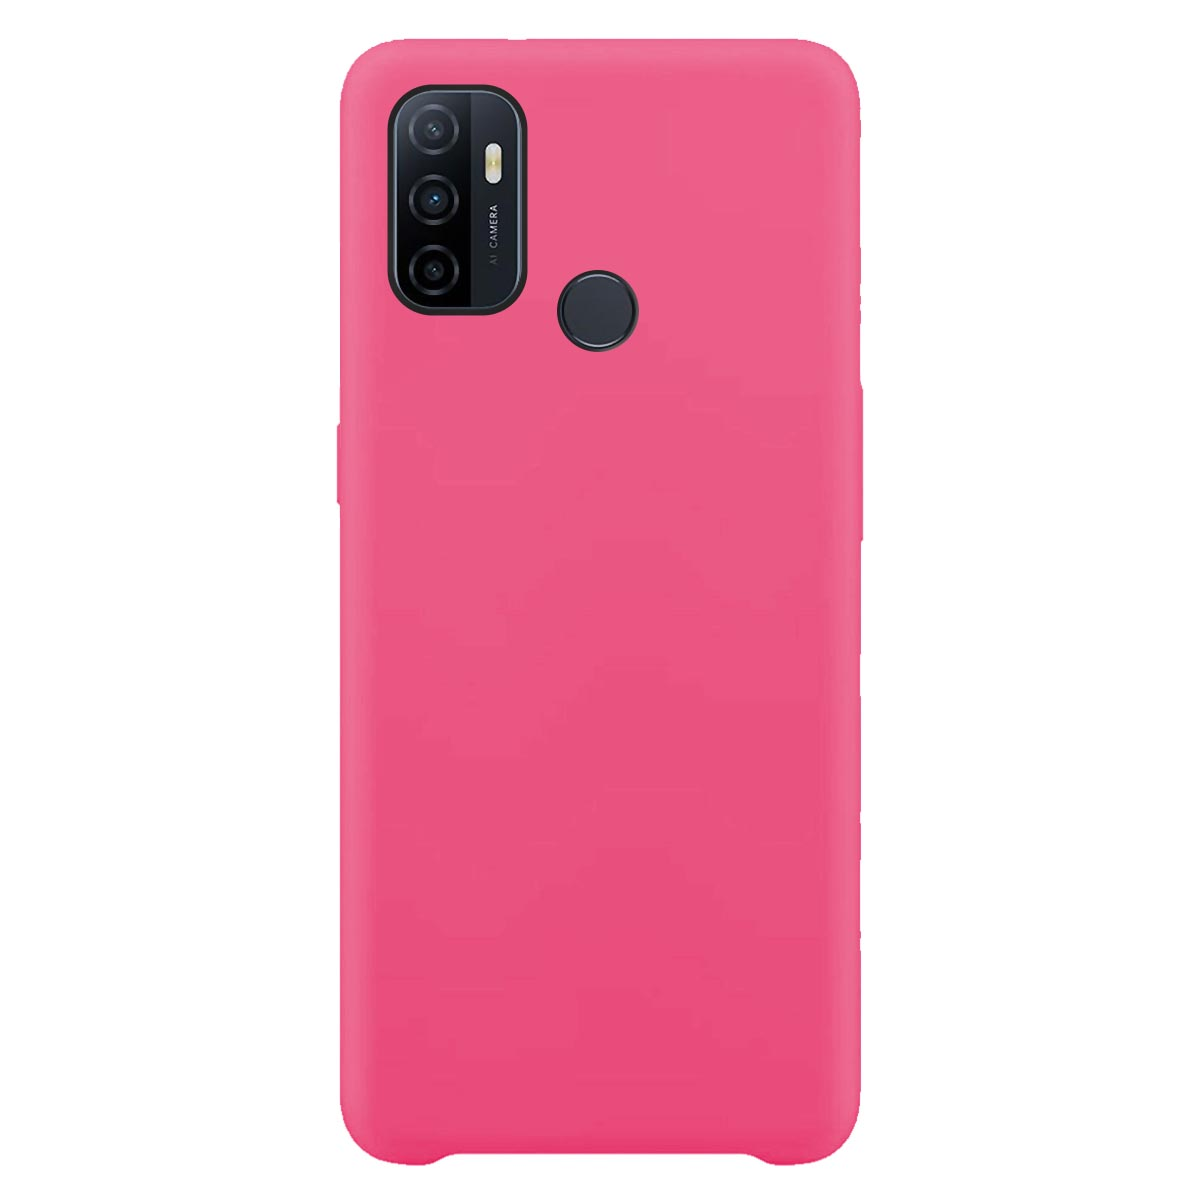 MTB MORE ENERGY Pink A53s, Liquid Oppo, Hot A53, Backcover, Silikon Case